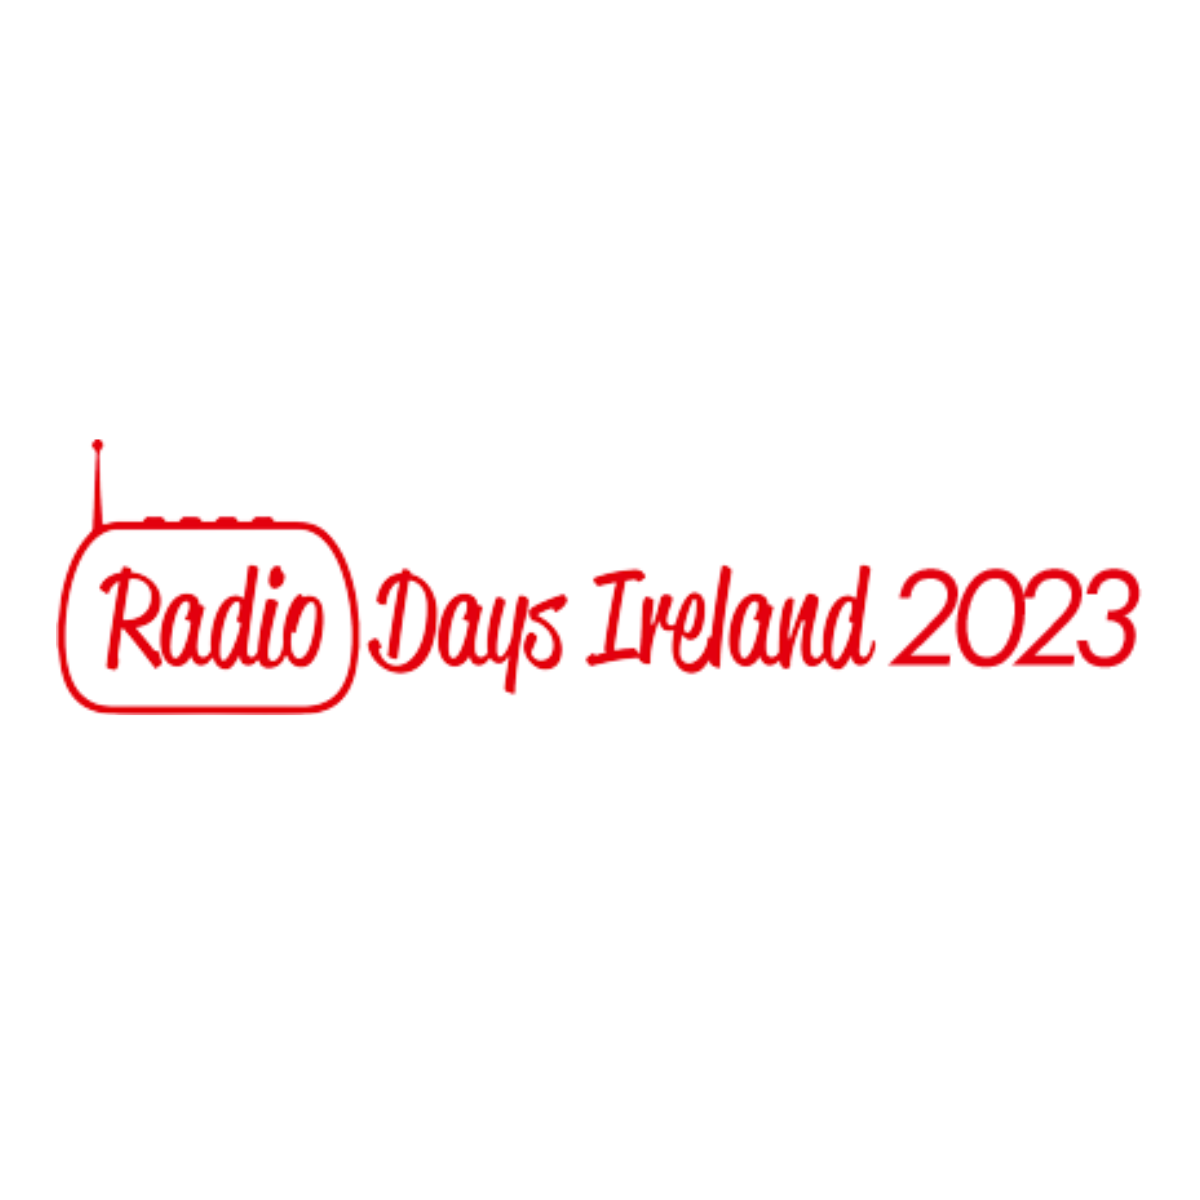 Event Notification :: RADIO DAYS IRELAND 2023 Conference Thursday 16th & Friday 17th February ::